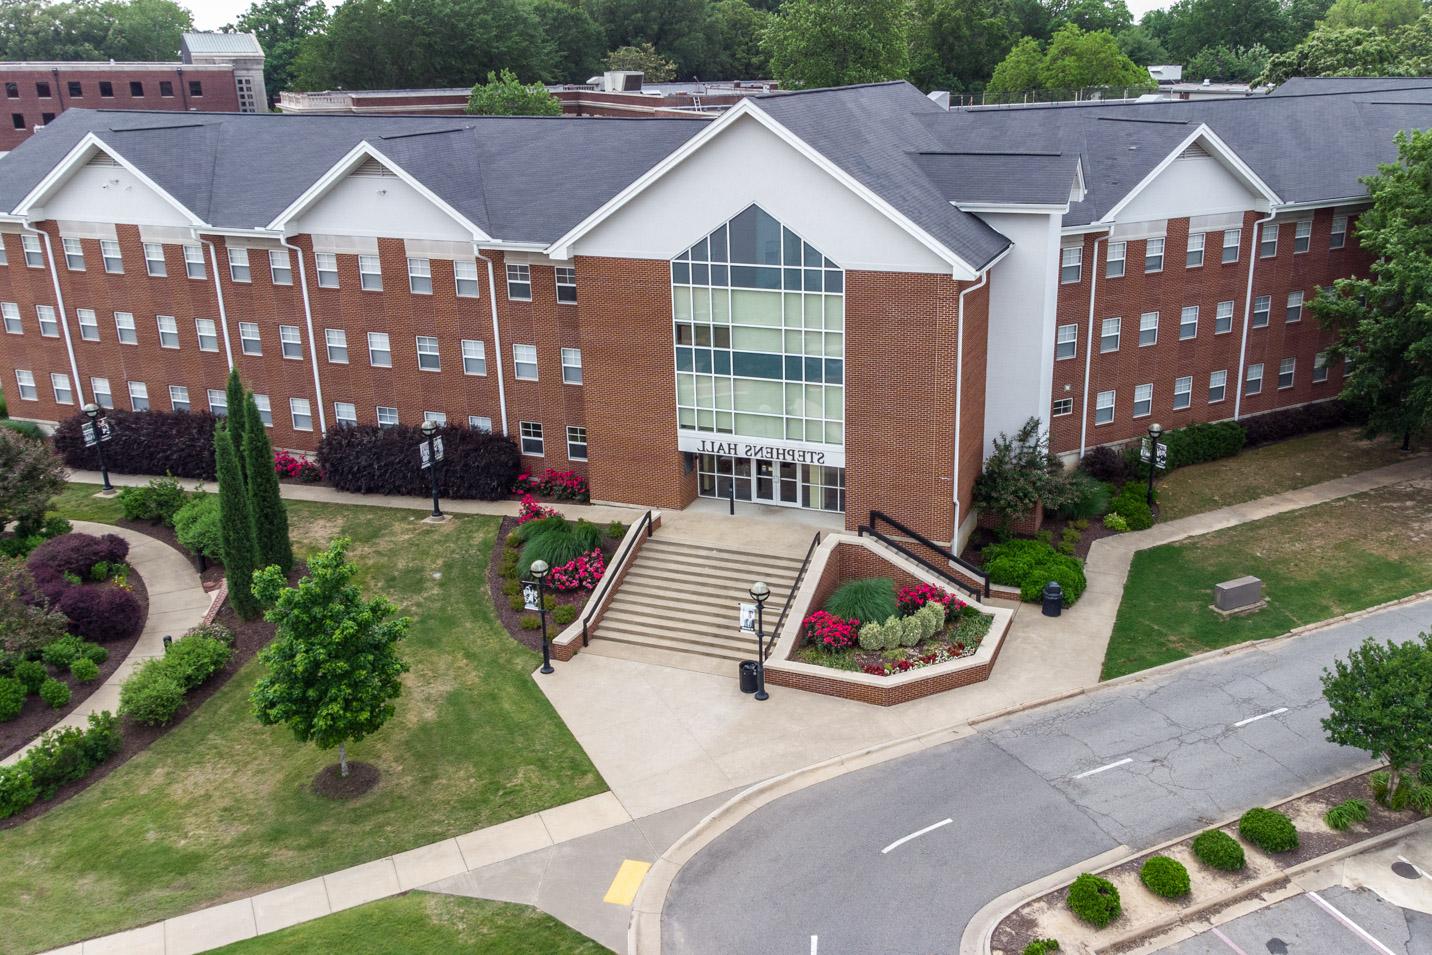 This is a photo of Stephens Hall, a women's residence hall at Harding University.